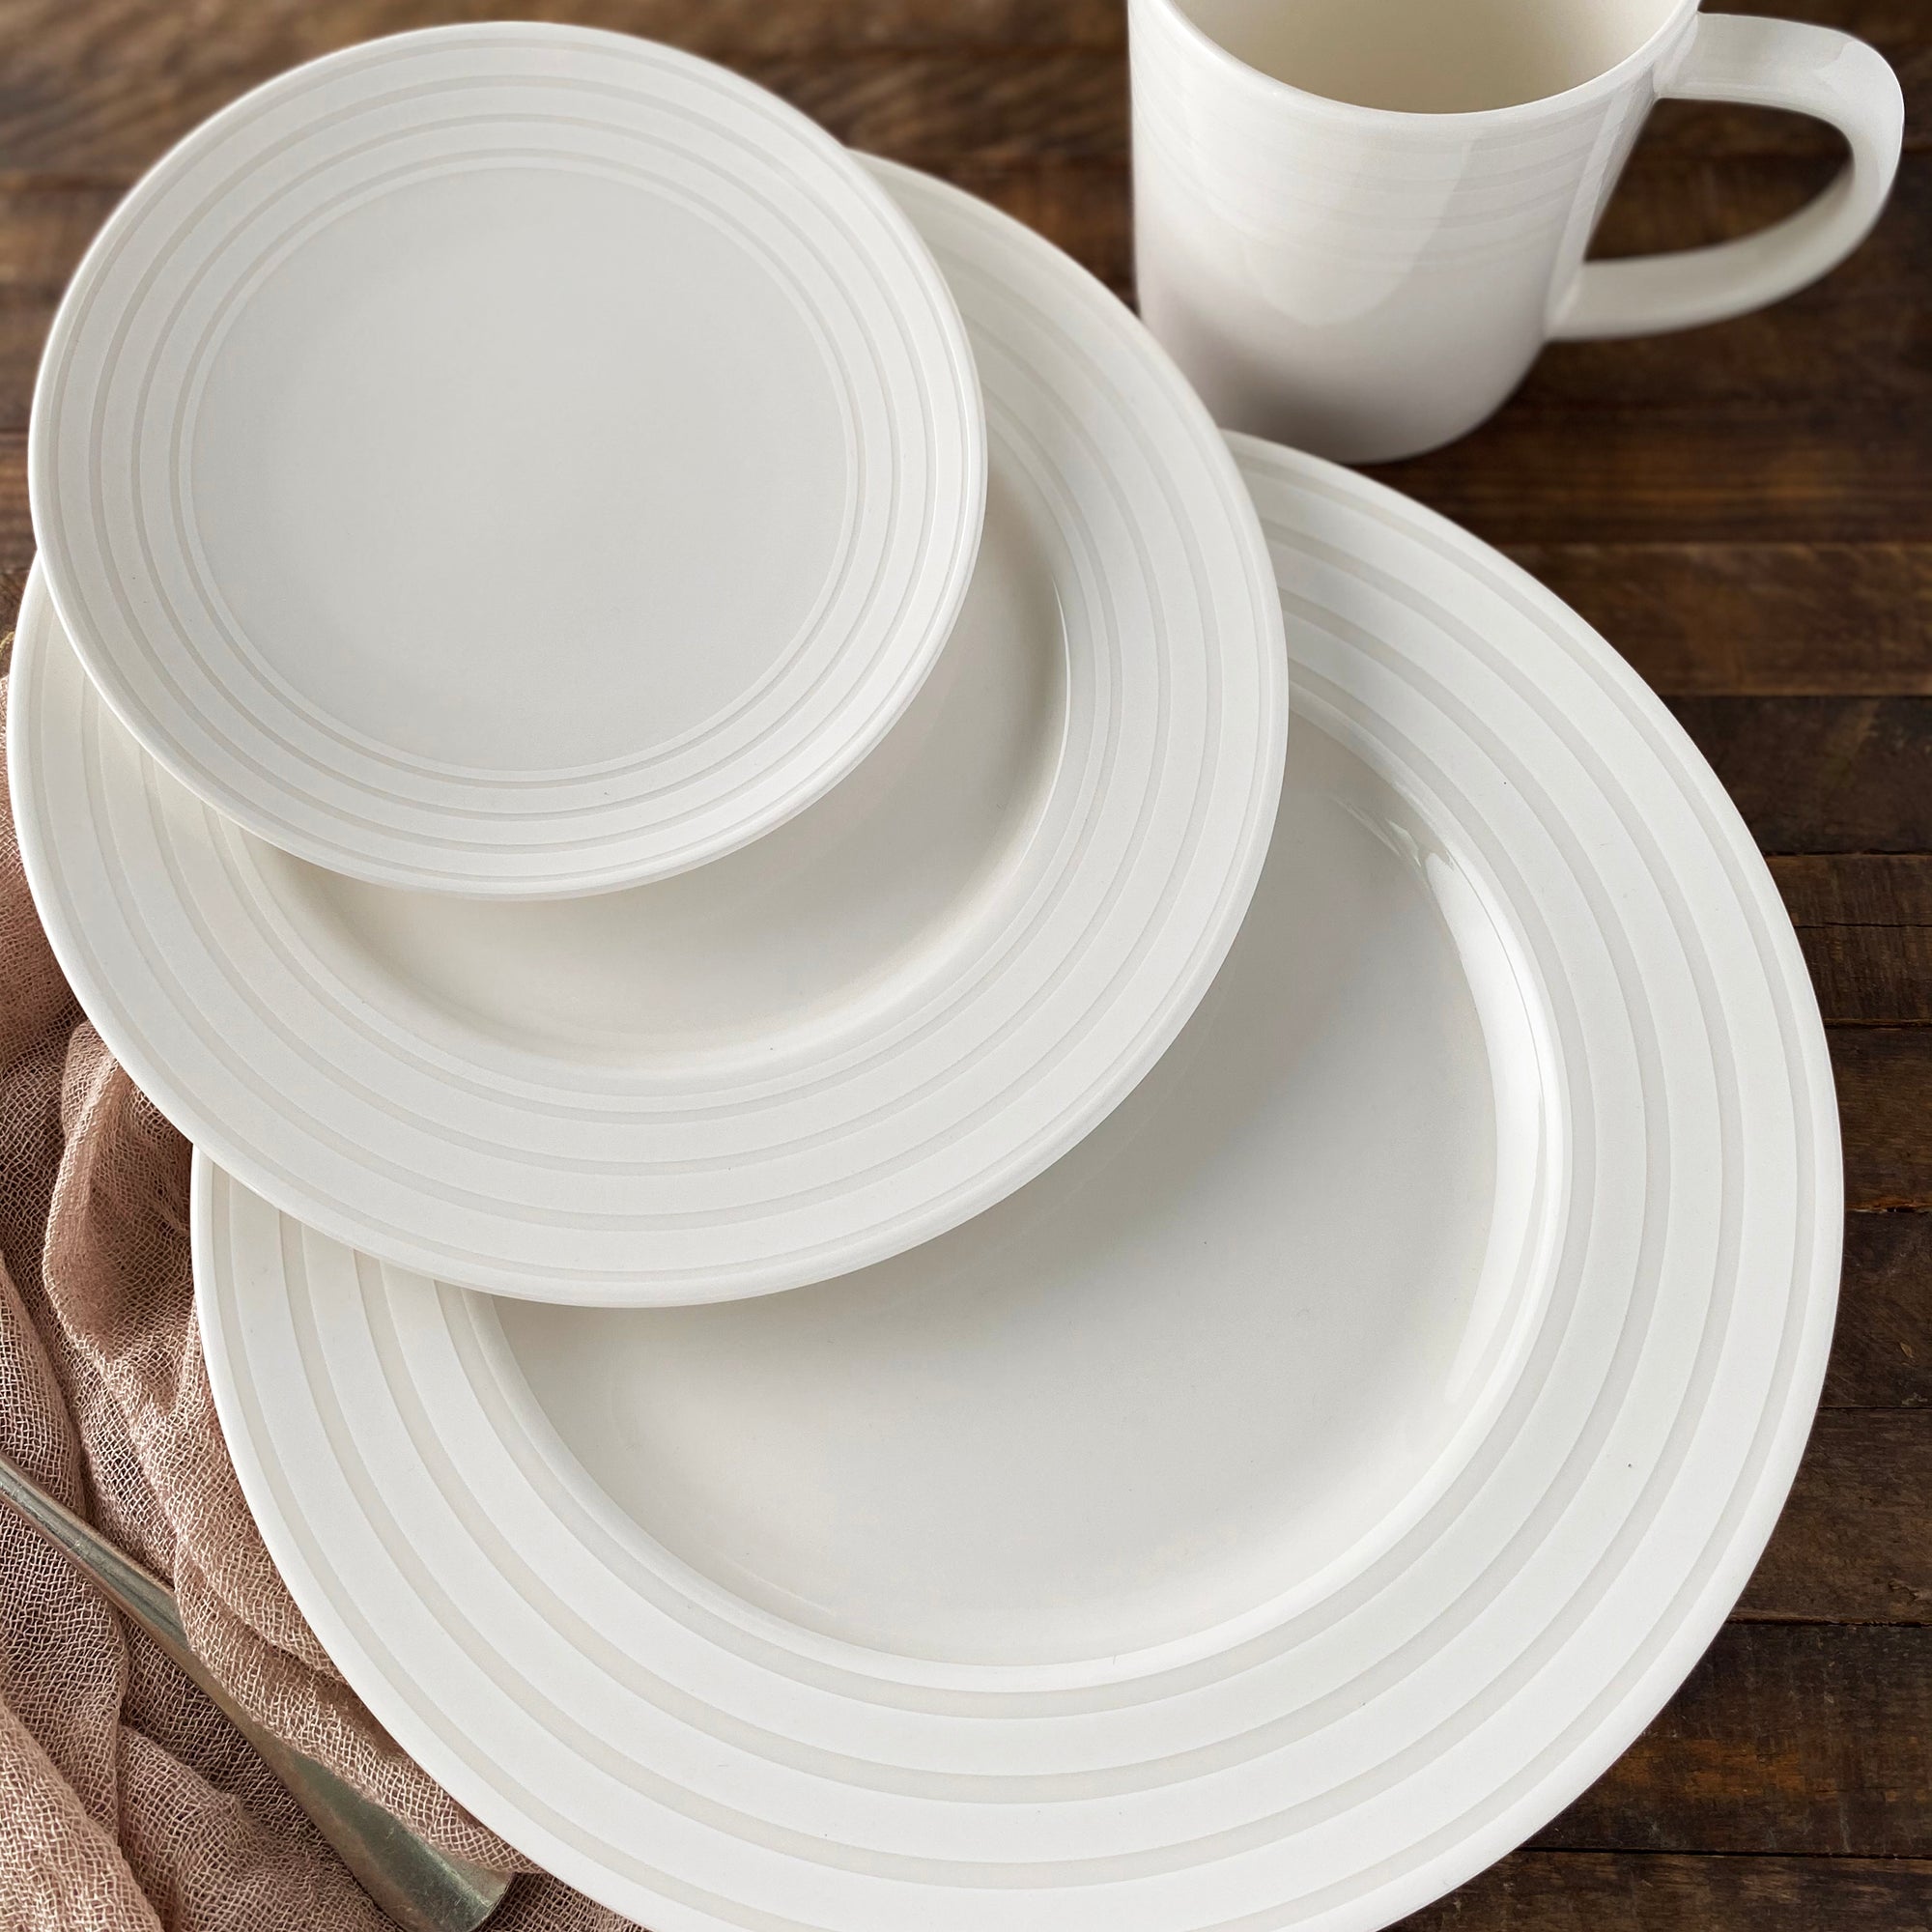 White, round ceramic dinner plate featuring a raised rim and subtle concentric ridges; this timeless dinnerware captures elegance reminiscent of the Caskata Artisanal Home Cambridge Stripe Rimmed Dinner Plate.